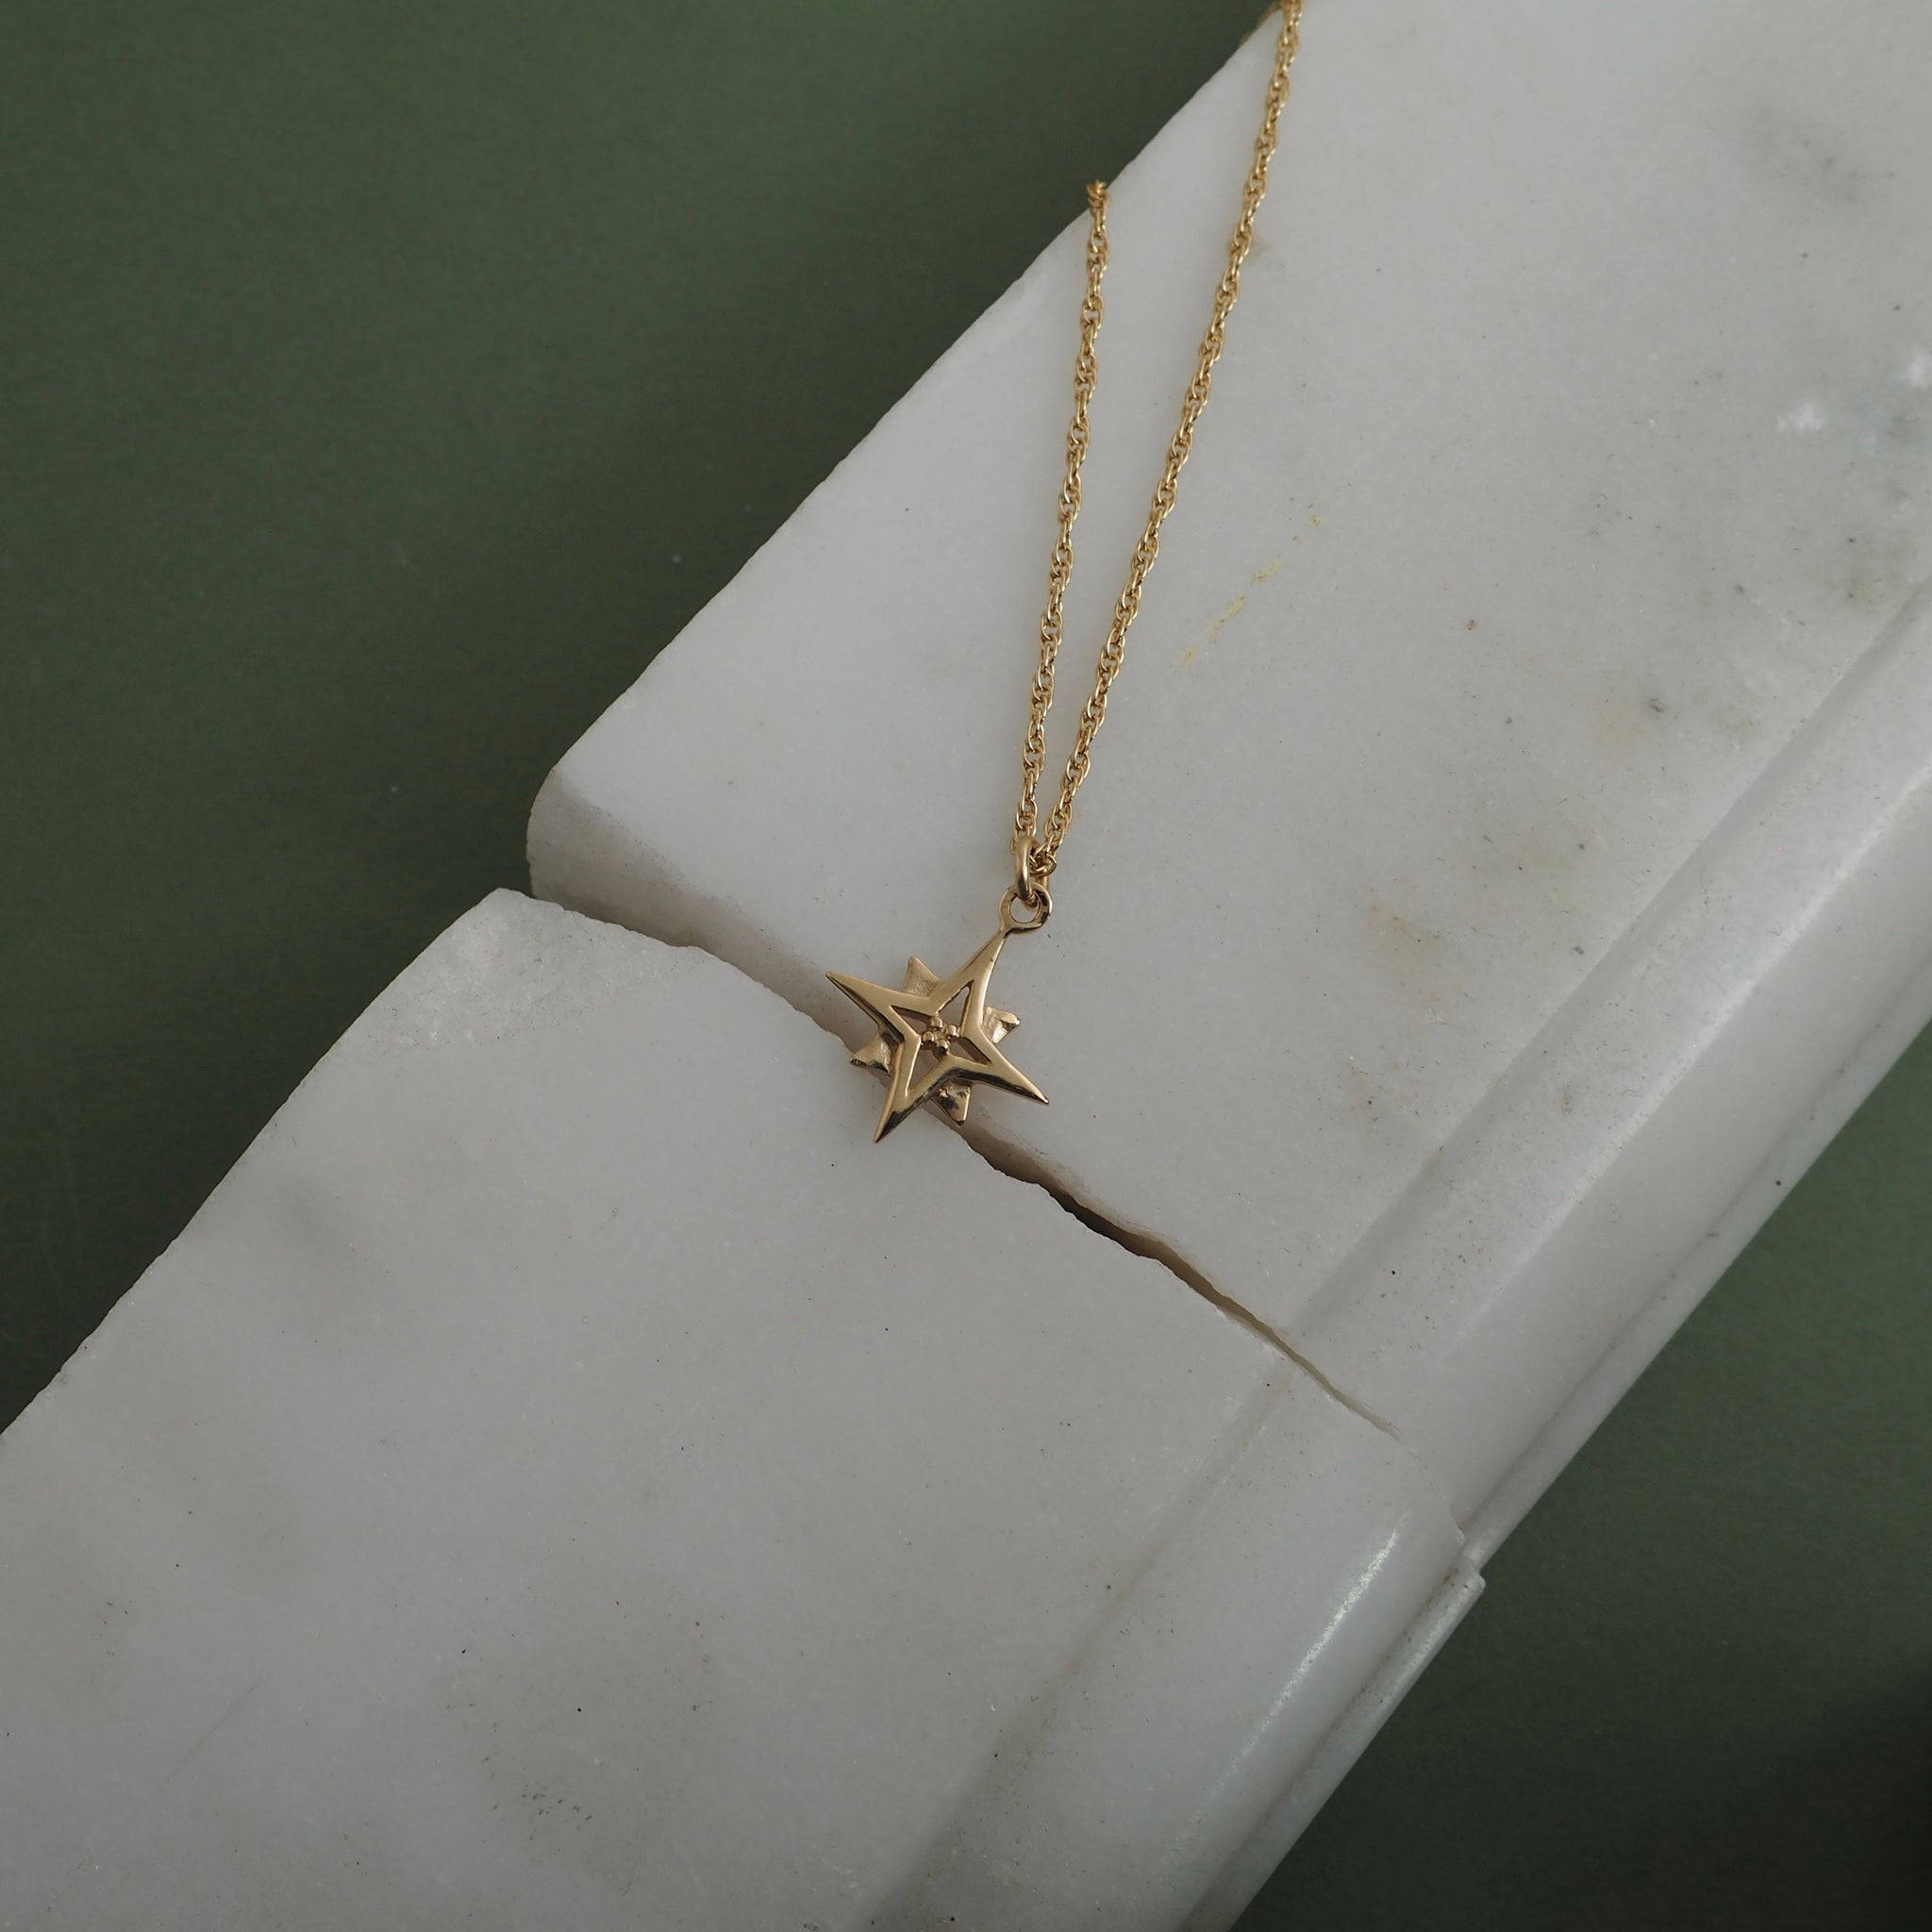 9ct Gold Compass Star Necklace by Yasmin Everley